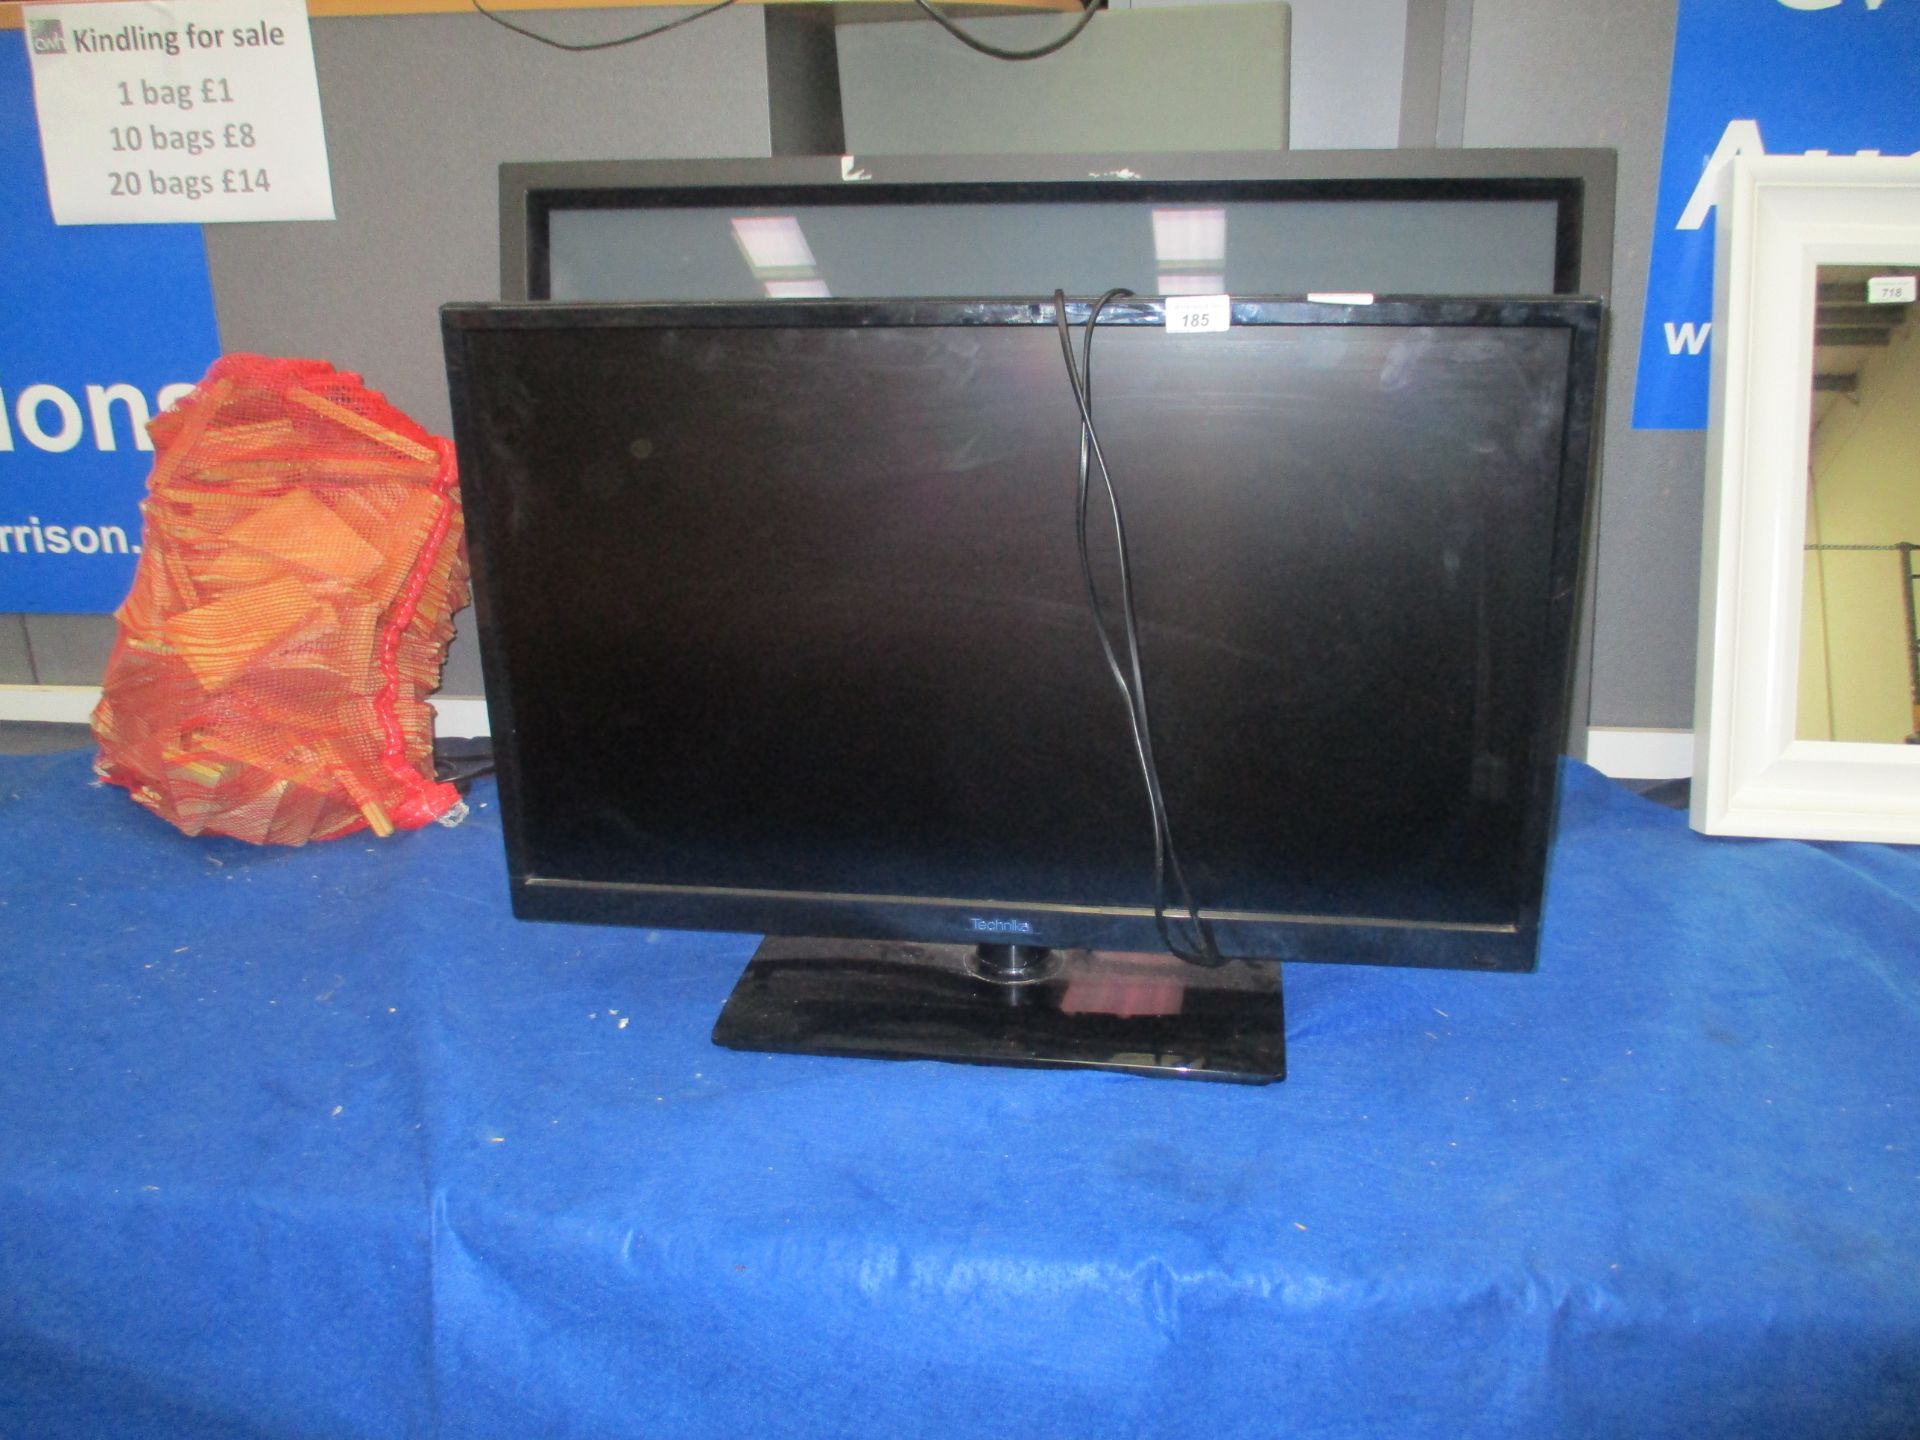 A Technika LED 32-E251 32" LCD TV complete with remote control